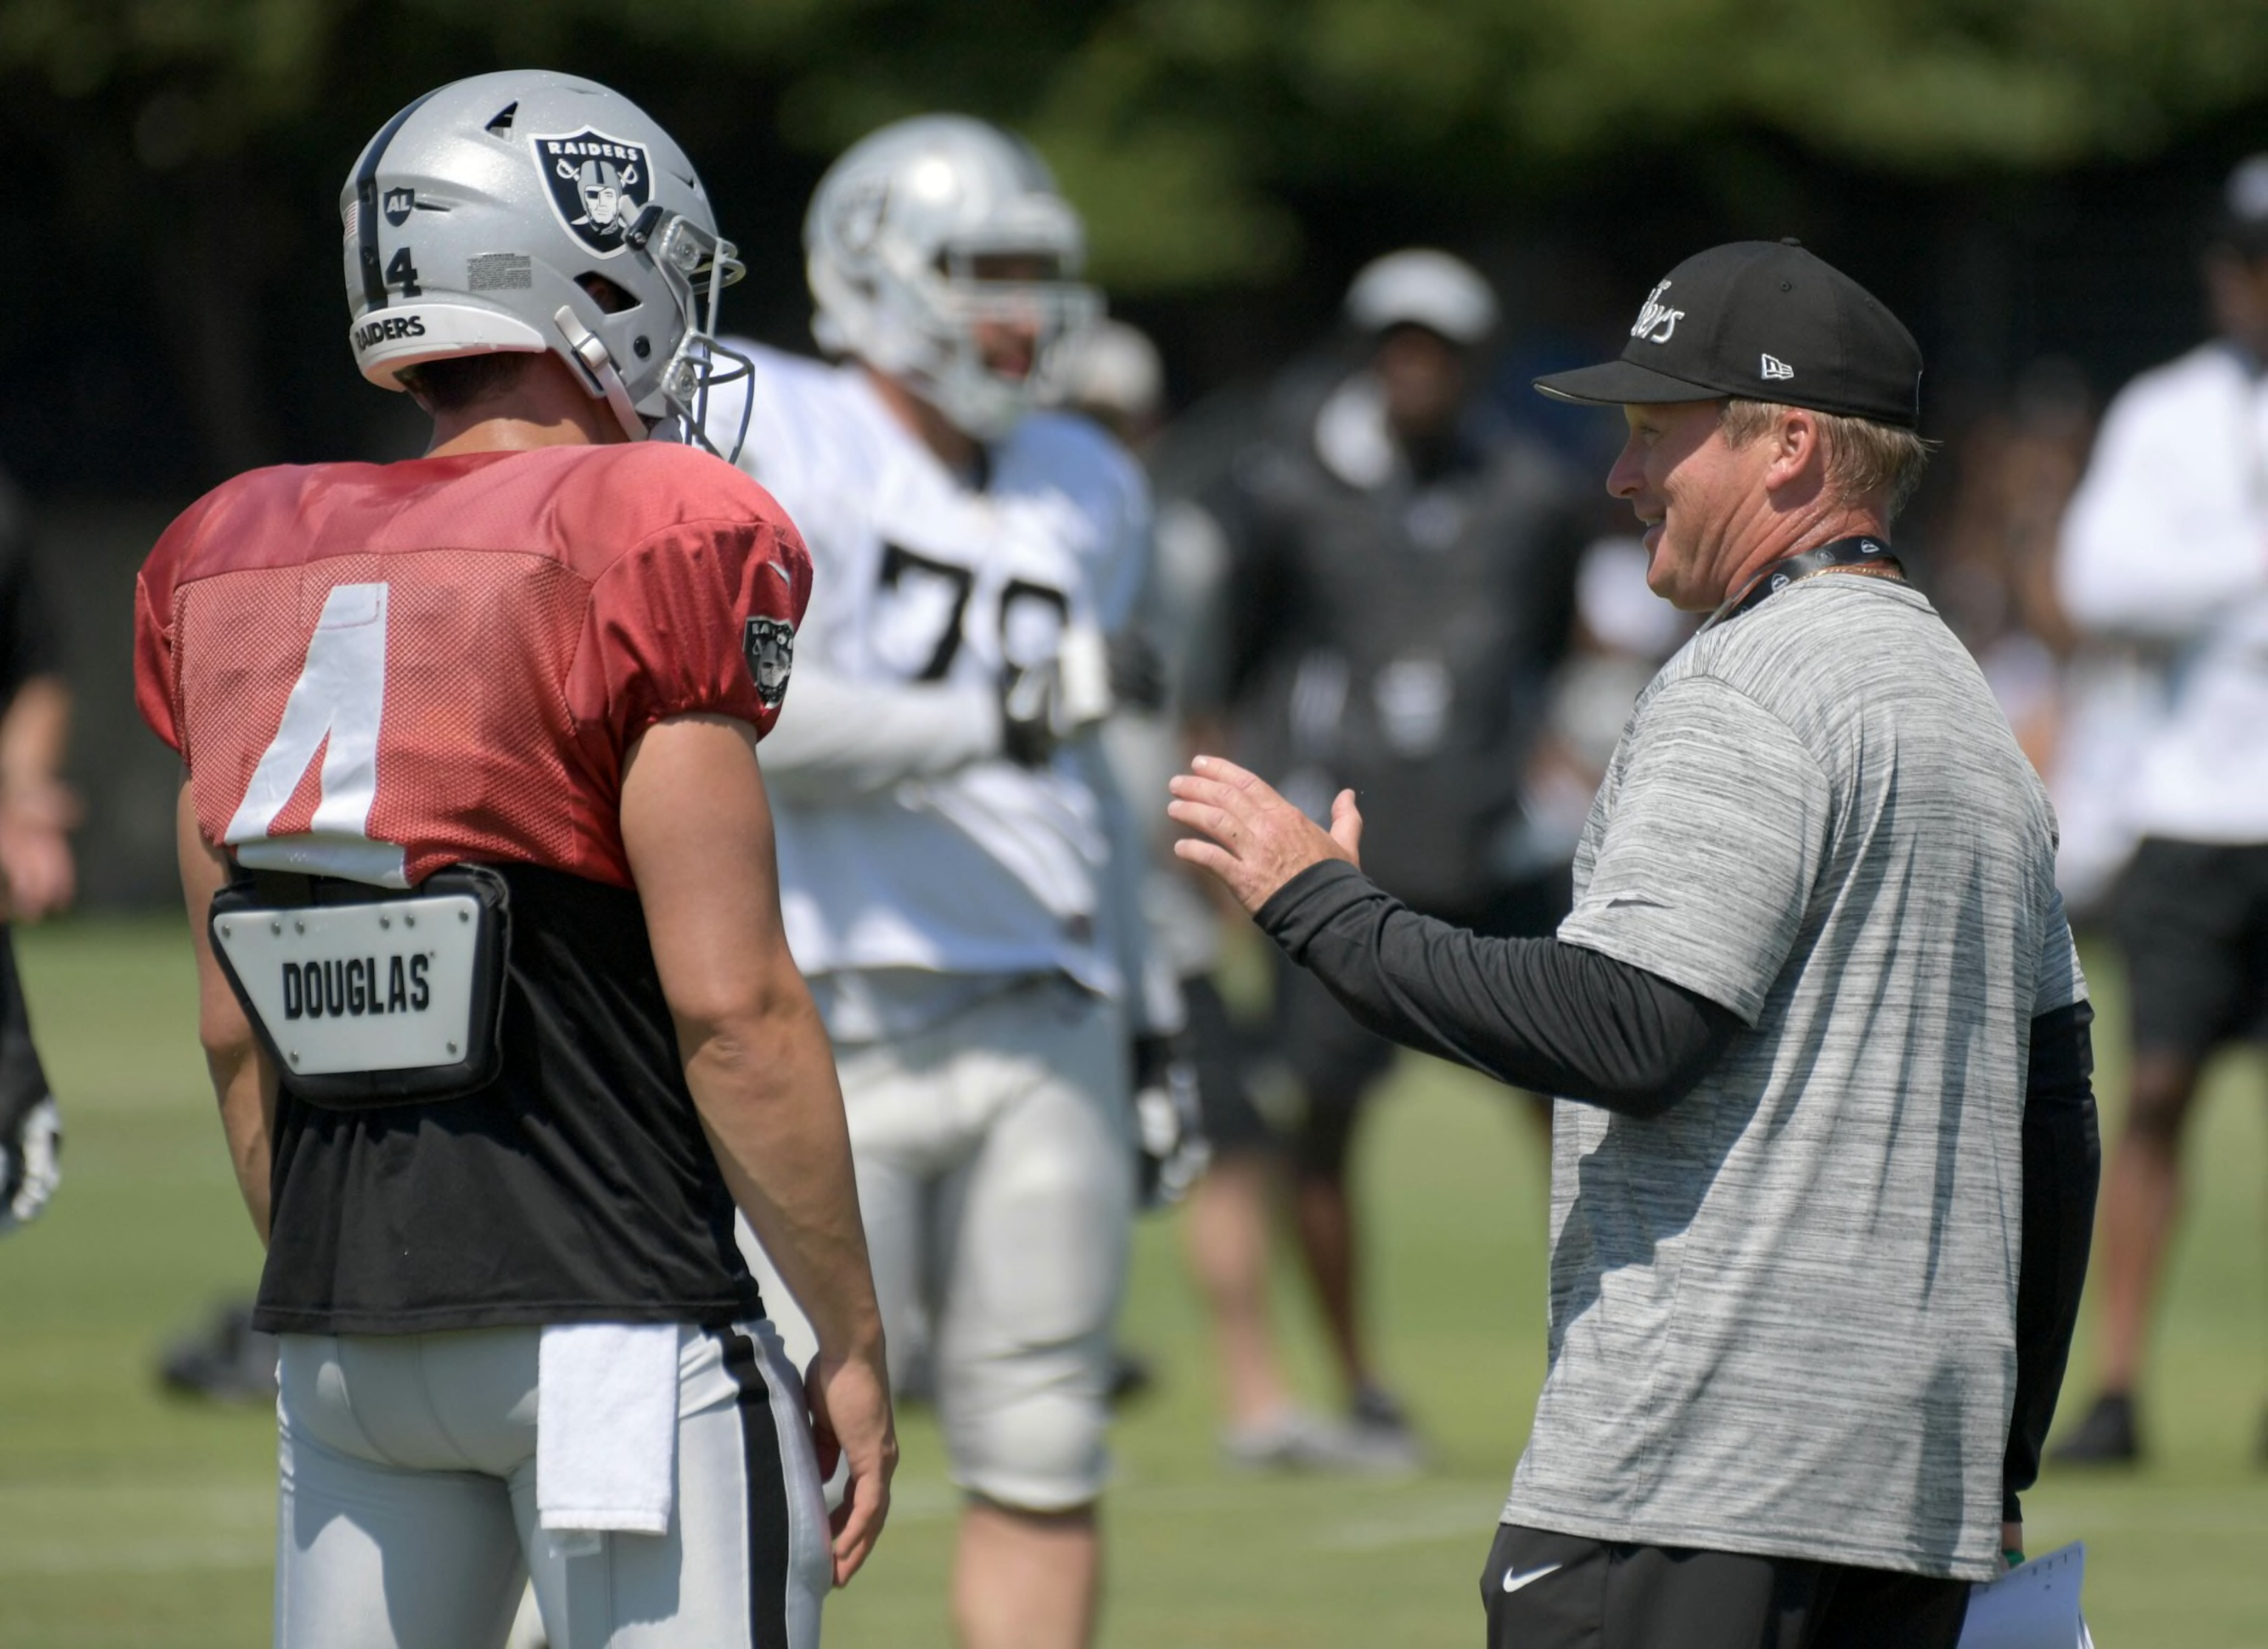 Raiders roster: 5 battles to watch during 2021 training camp